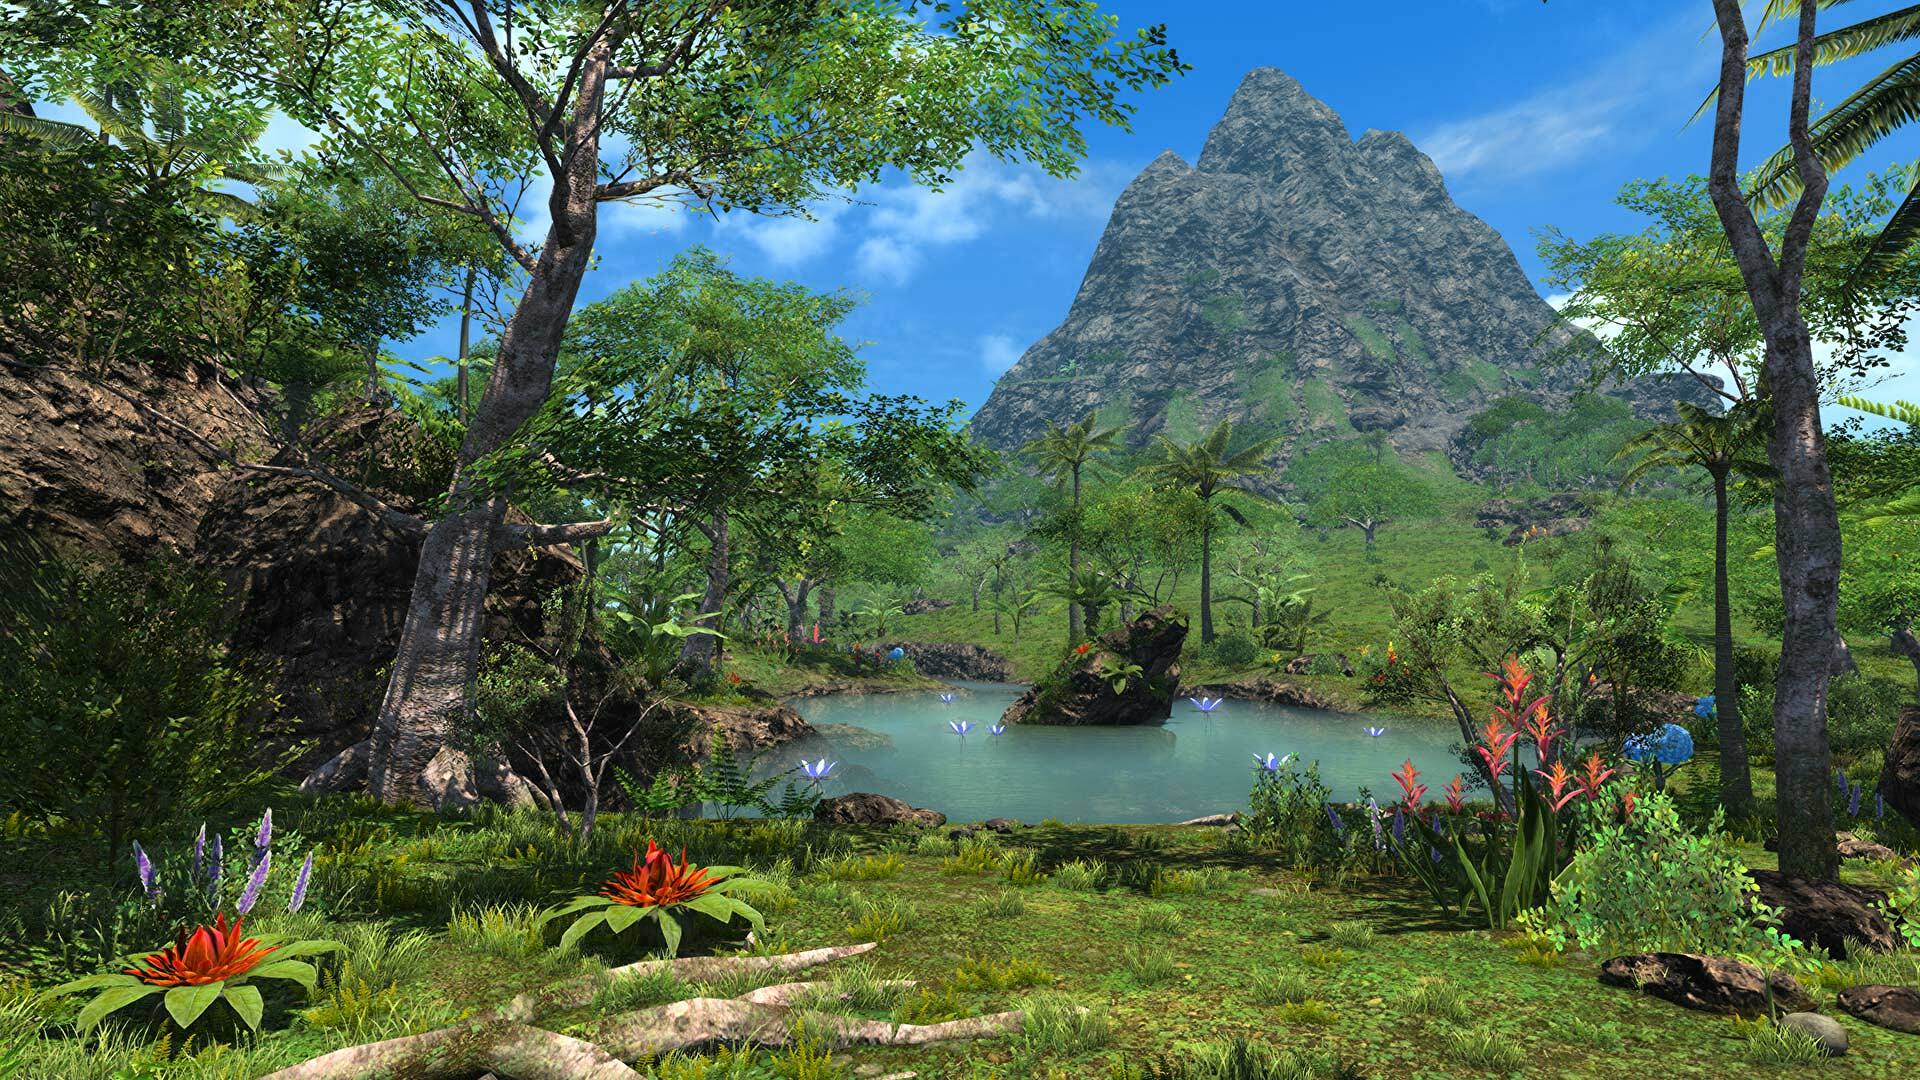 Final Fantasy 14’s Island Sanctuary update will arrive on August 23rd